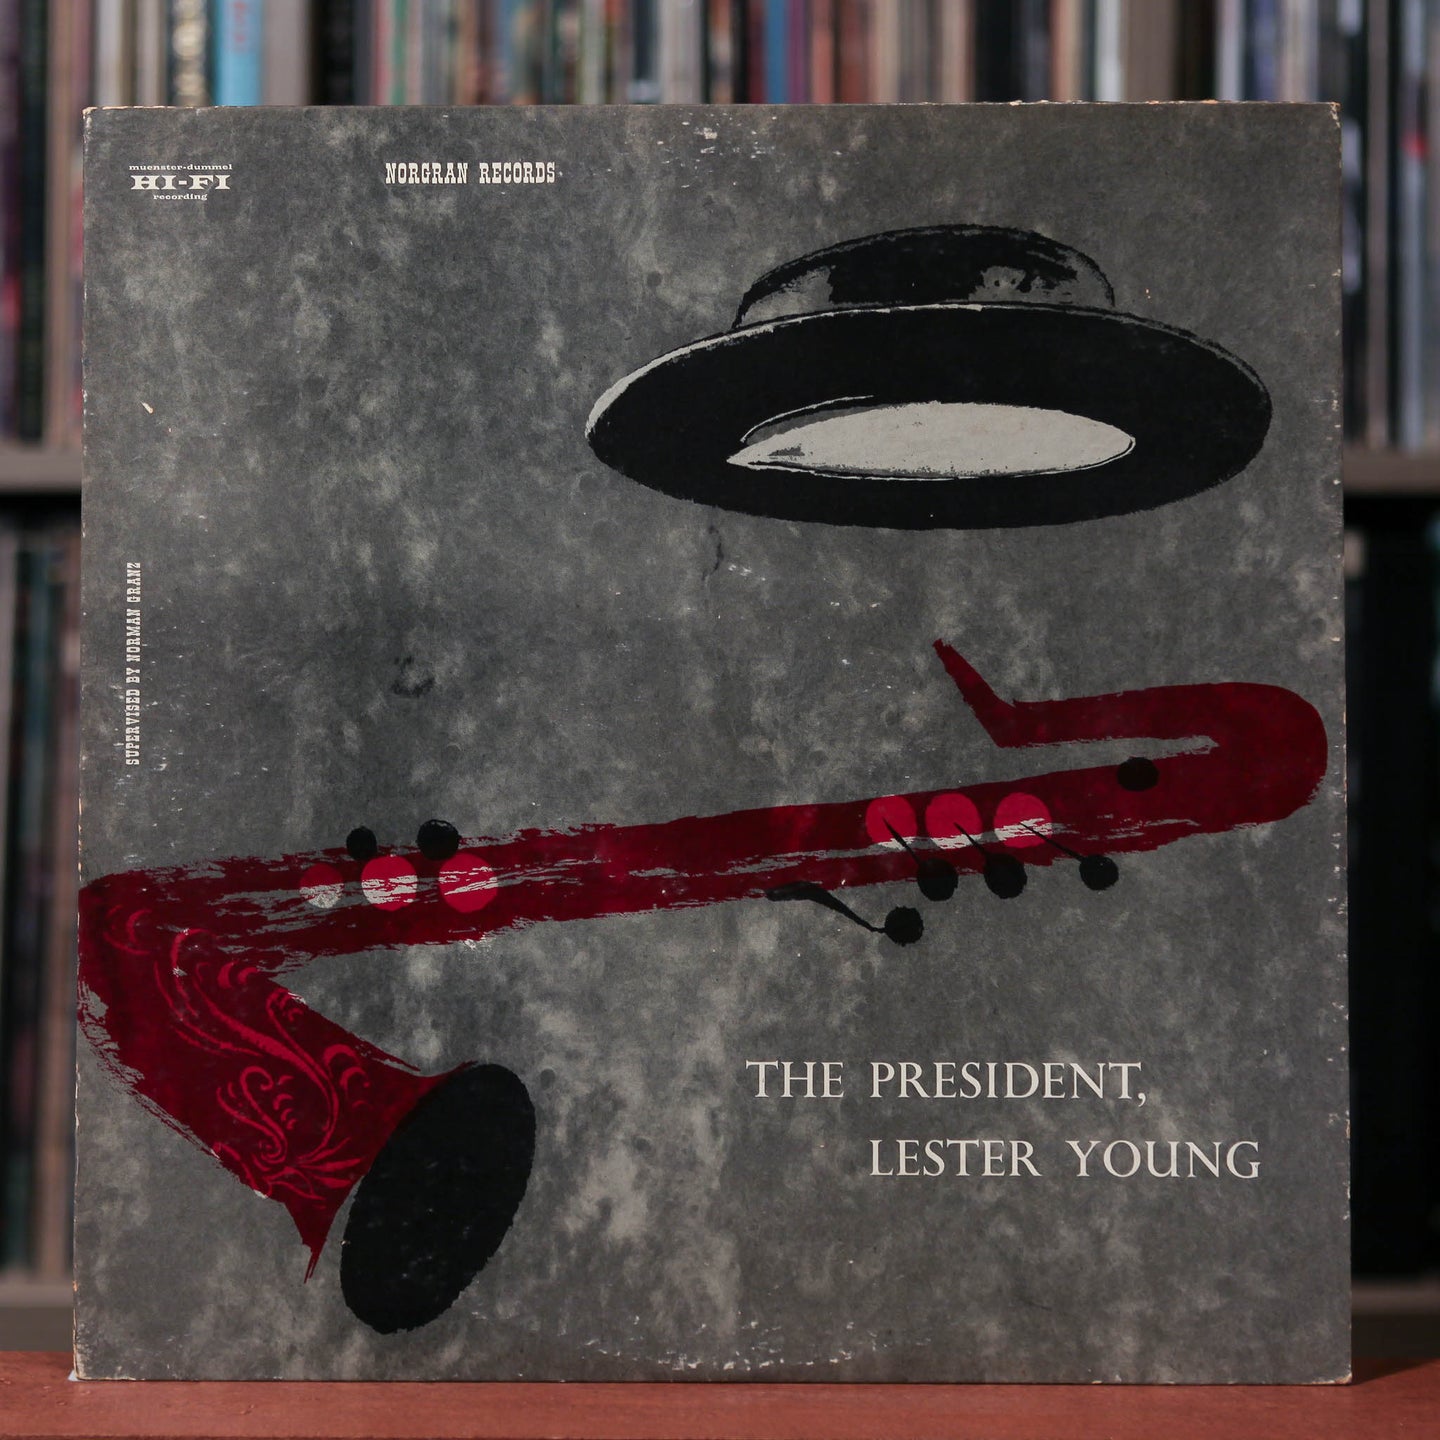 Lester Young - The President - 1954 Norgran, VG+/VG++